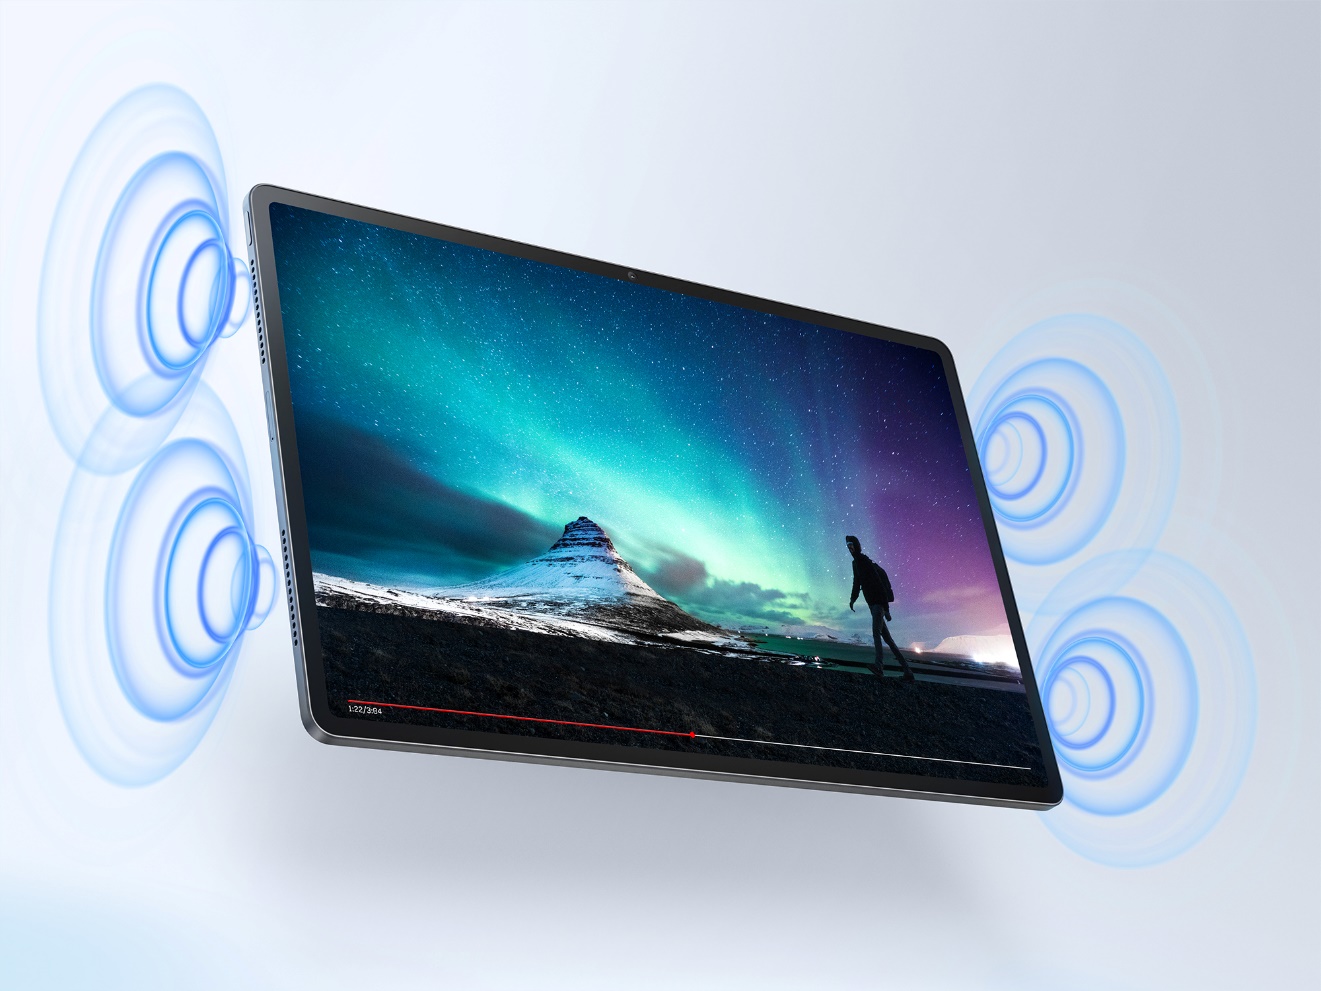 Frequently Asked Questions (FAQs) for Lenovo Tab Extreme - Lenovo Support GB